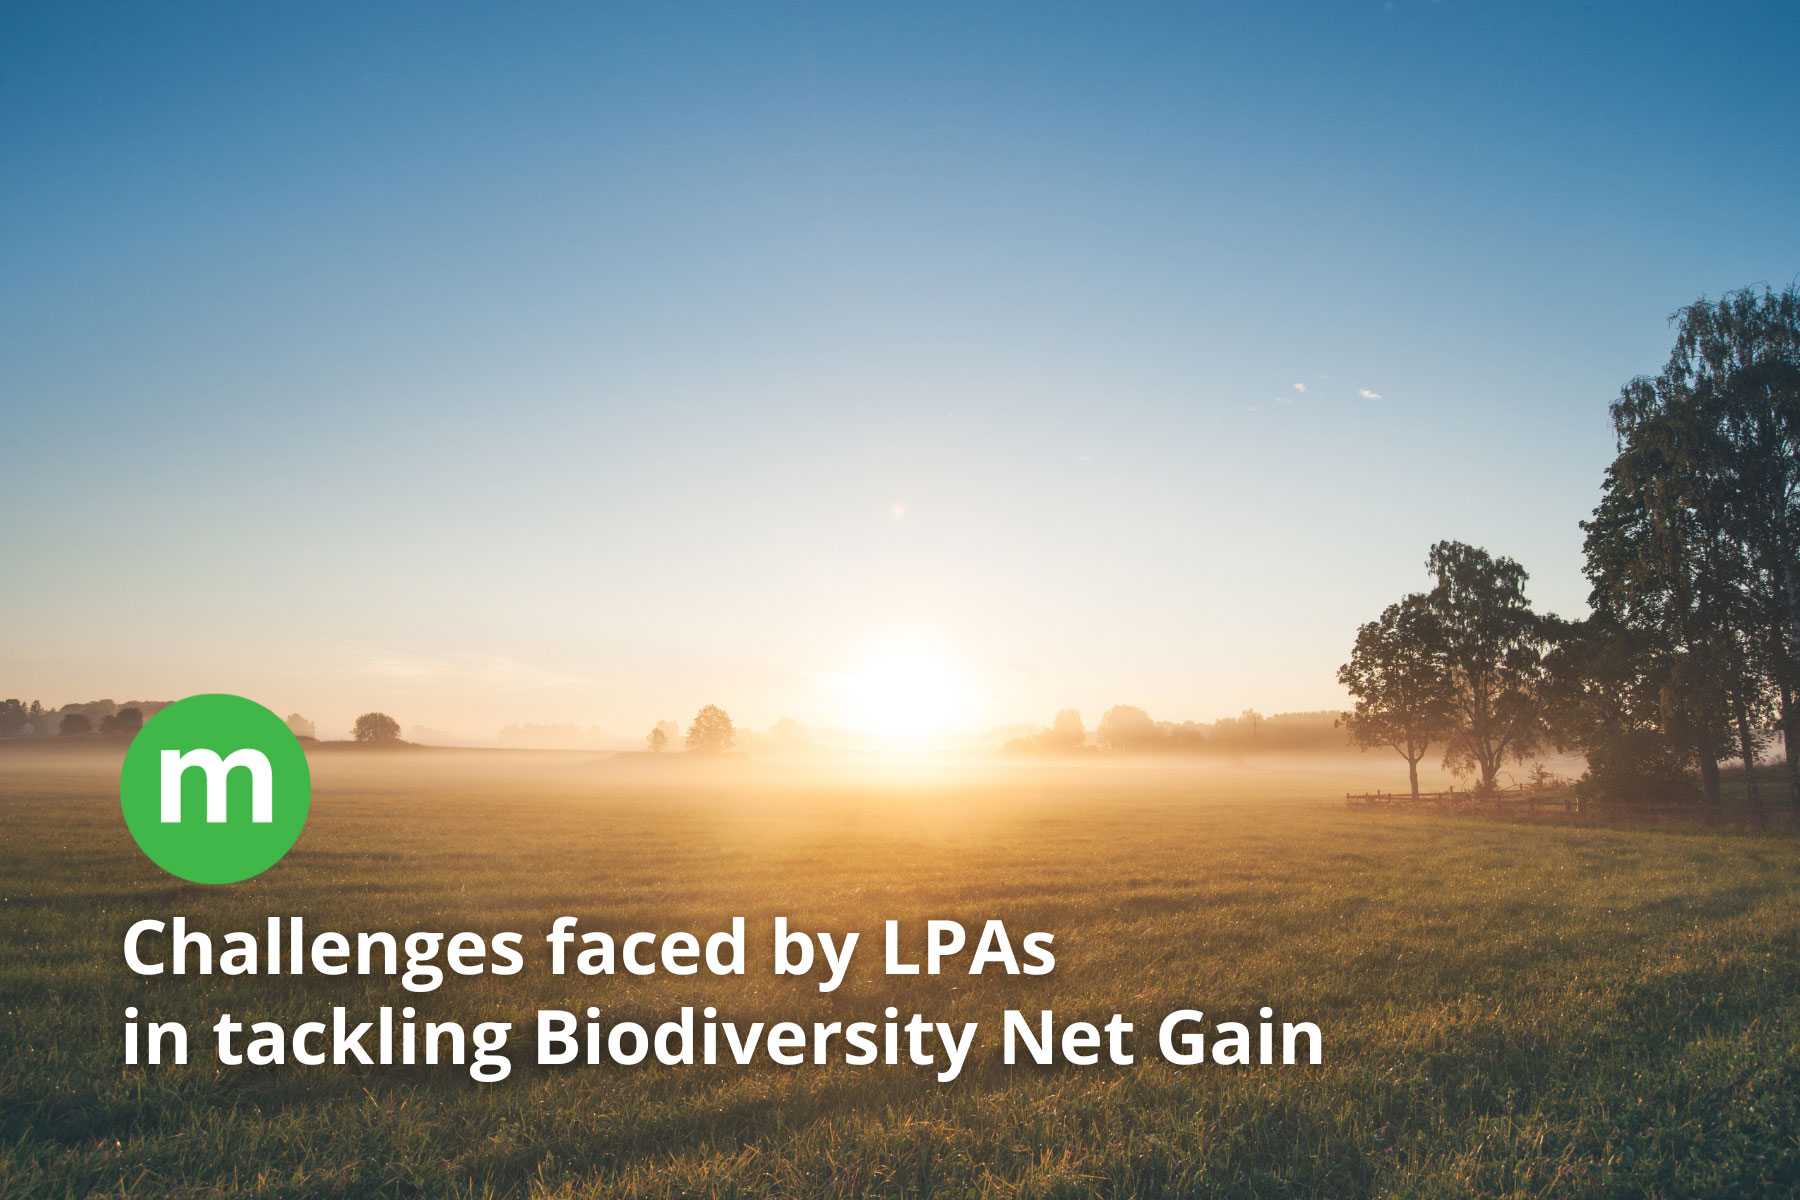 Challenges faced by LPAs in tackling Biodiversity Net Gain